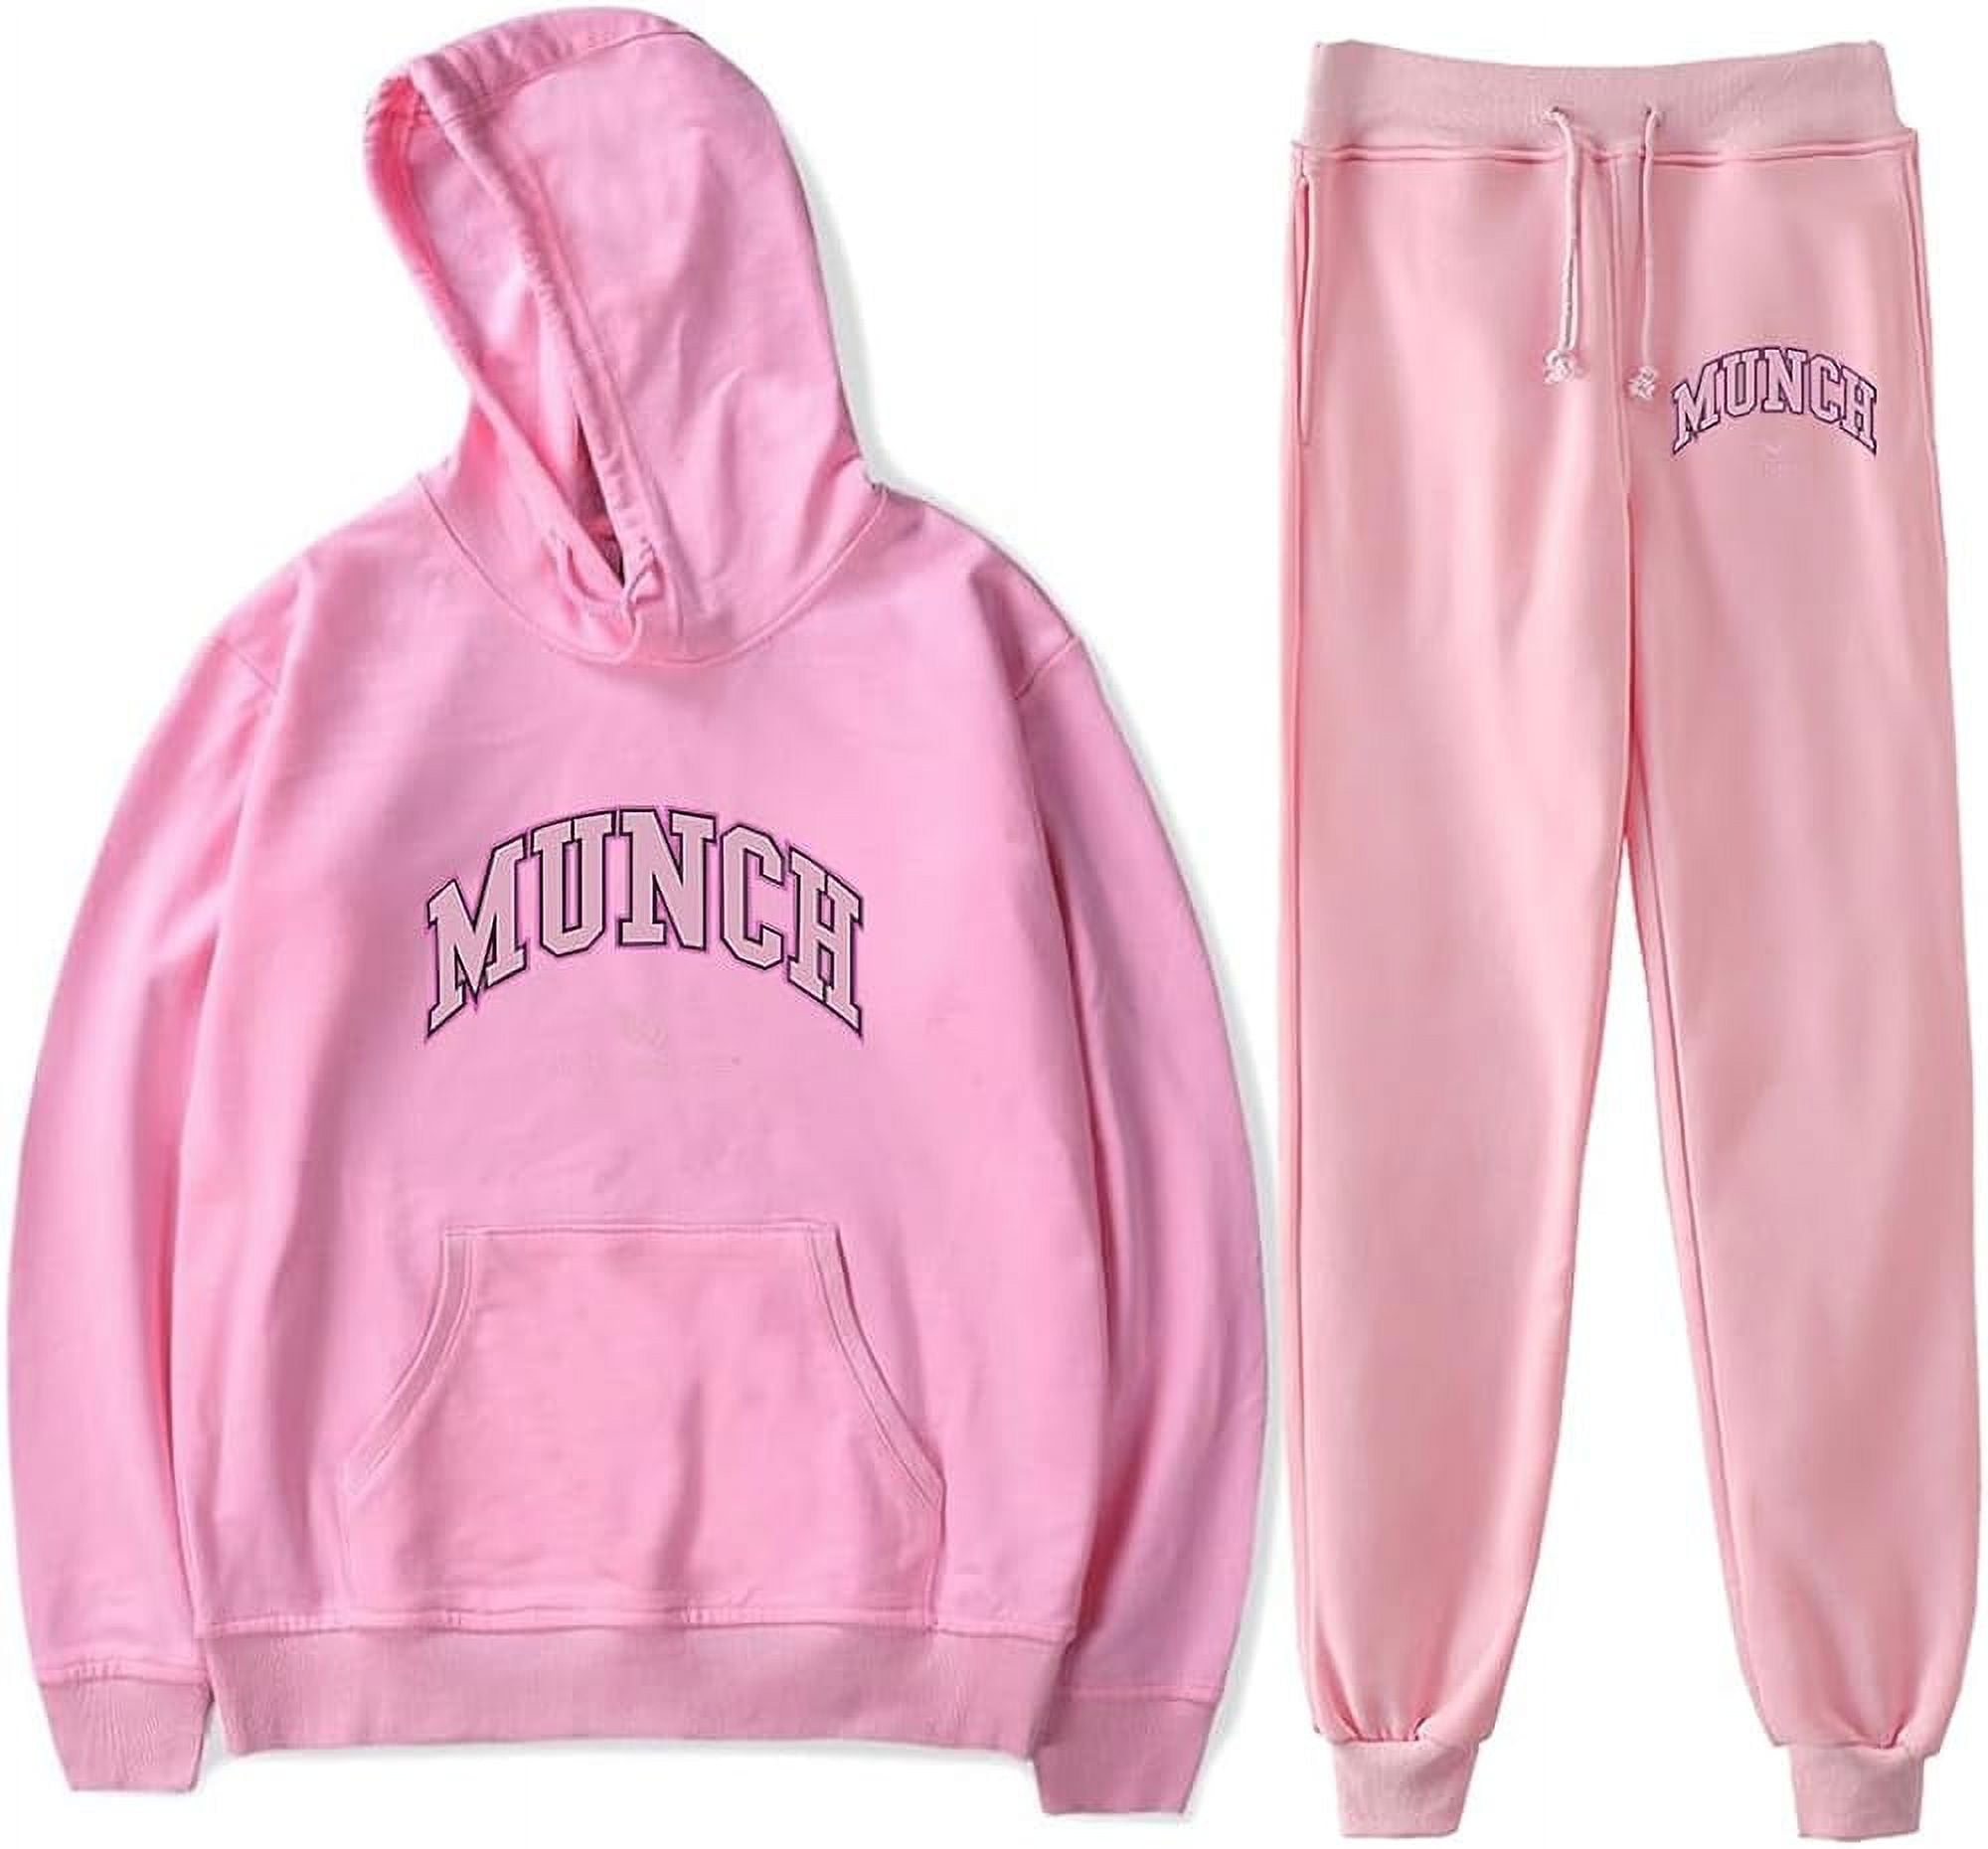 Singer Ice Spice Munch Mercch Hoodie & Pant Sets Unisex Two Pieces Suit ...